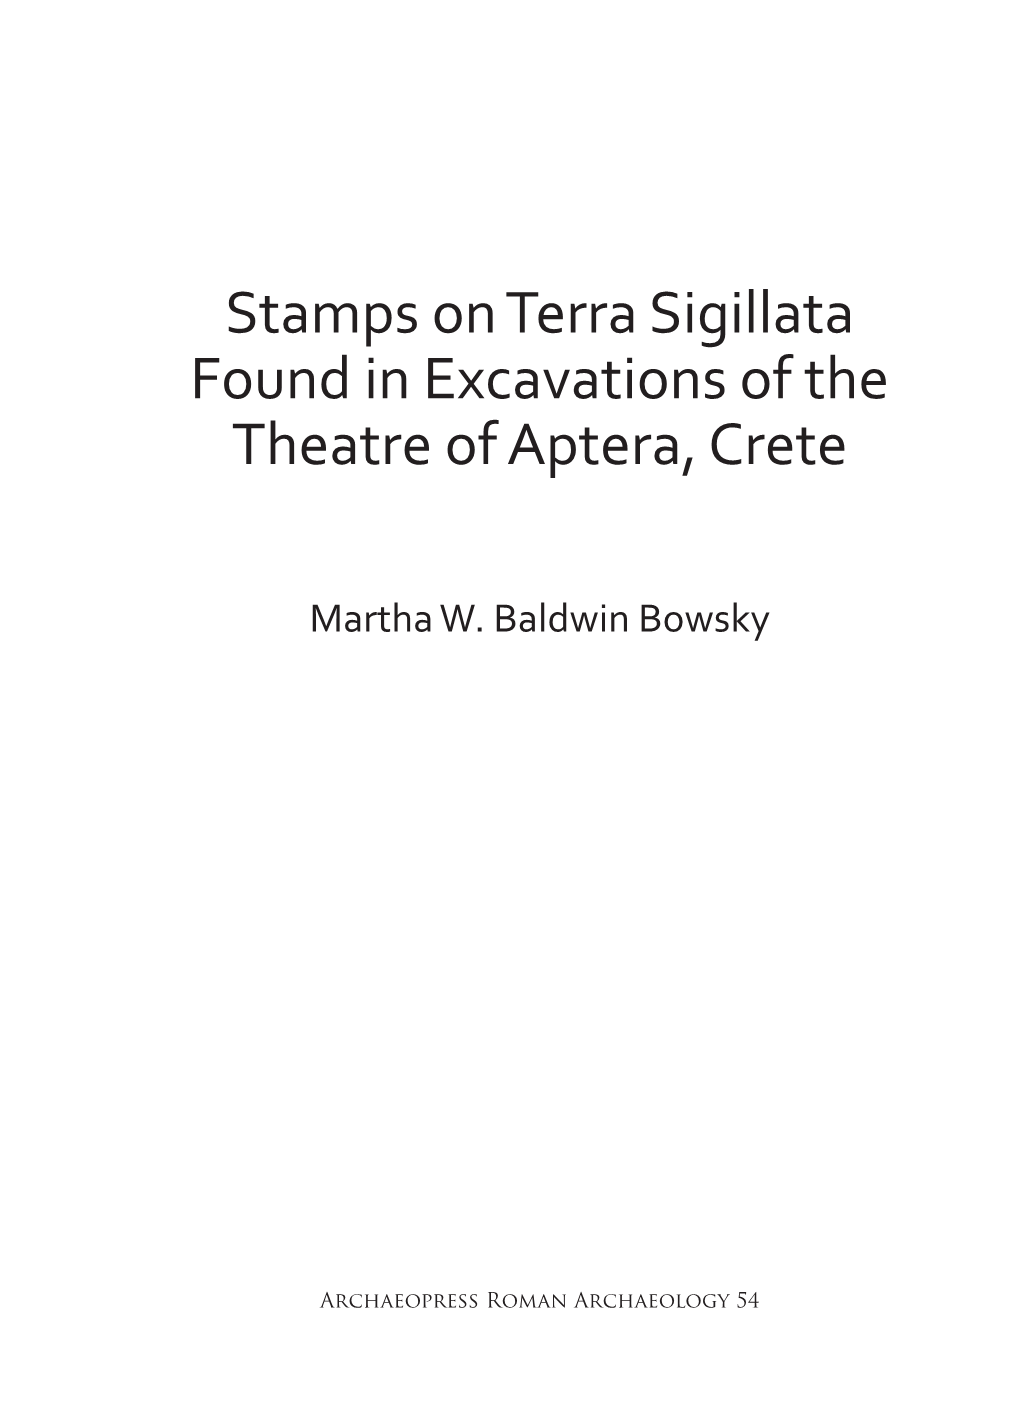 Stamps on Terra Sigillata Found in Excavations of the Theatre of Aptera, Crete